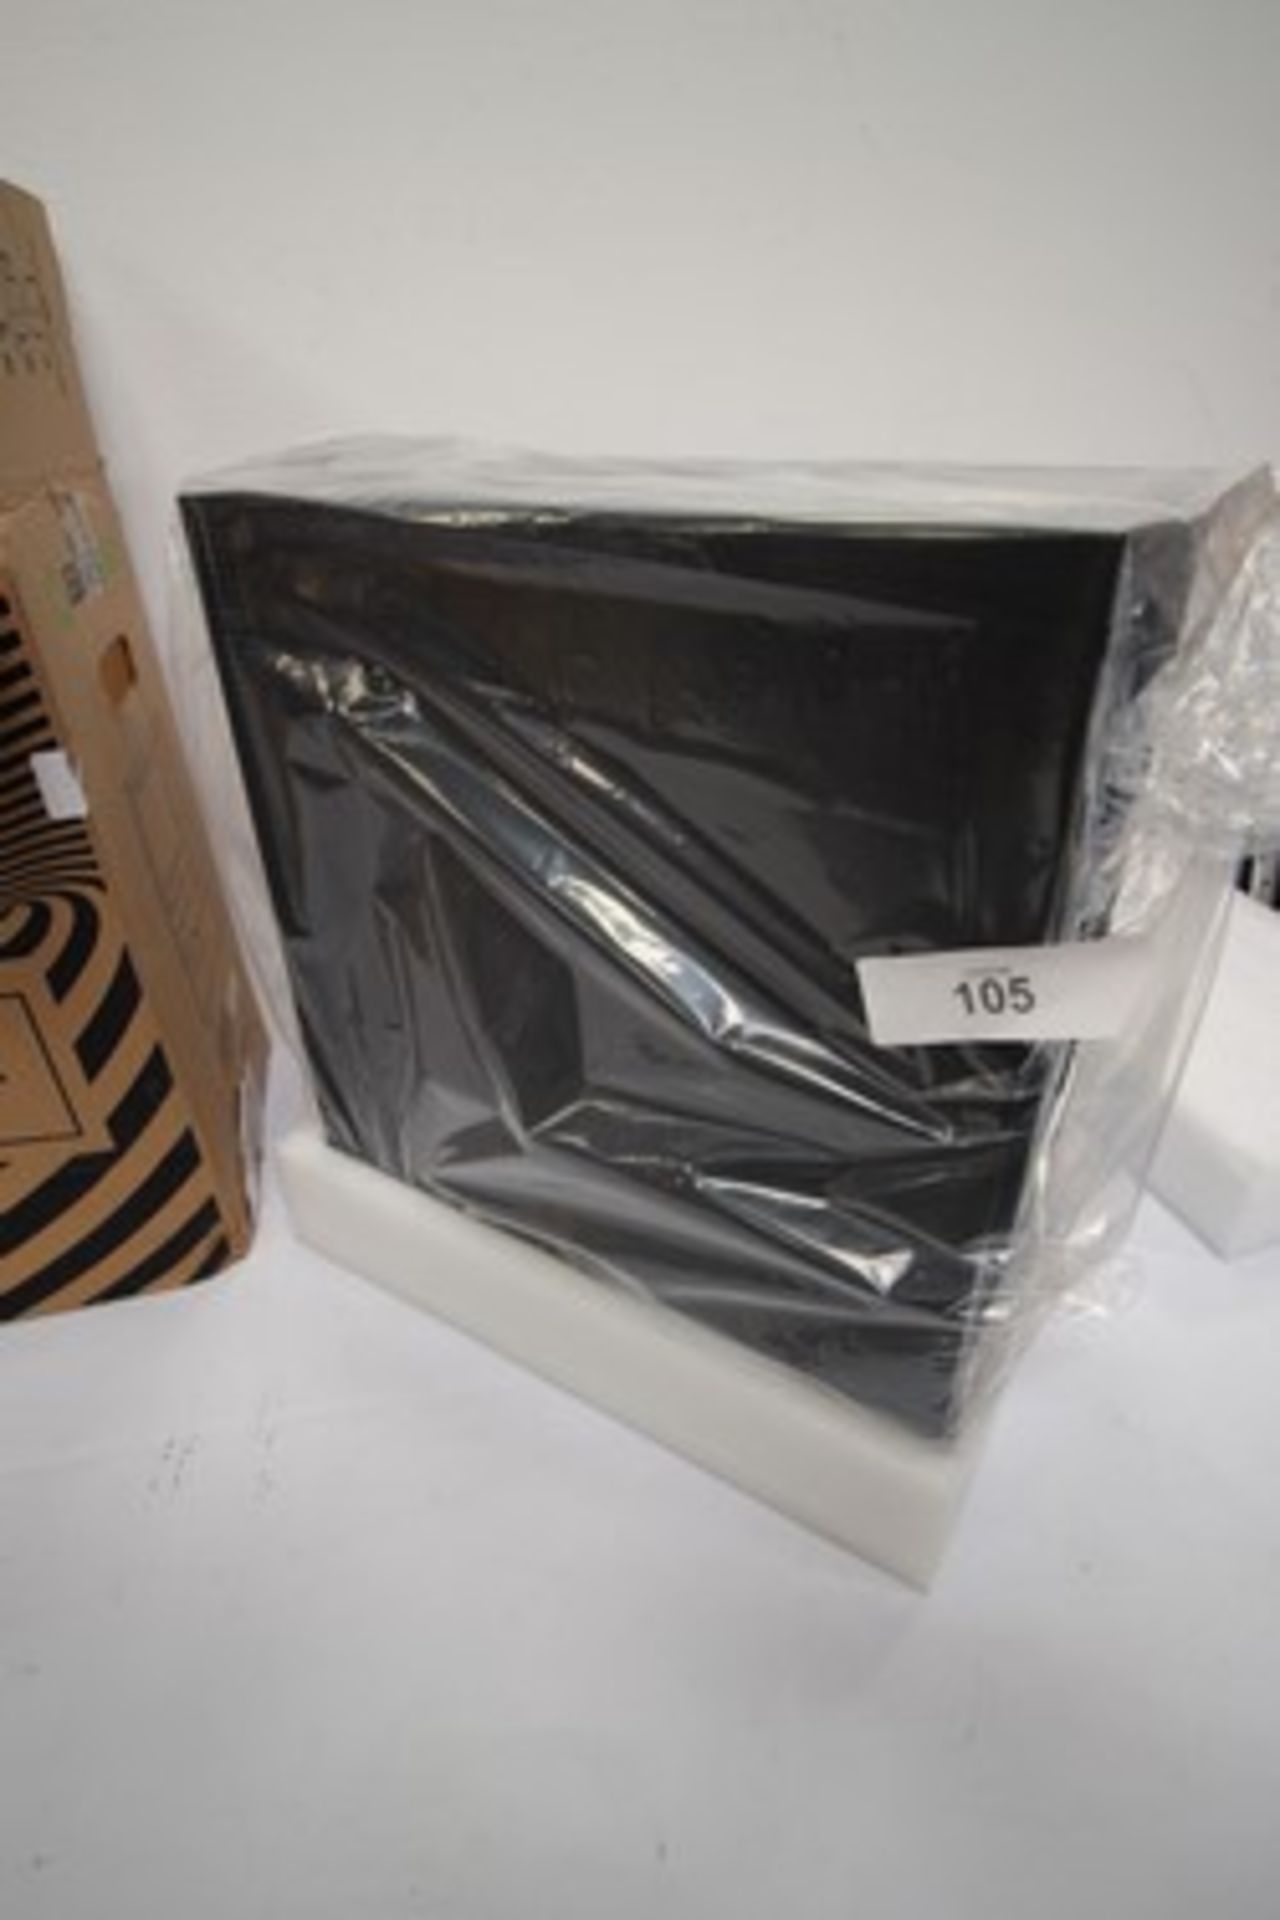 1 x Game Max black hole mid tower PC case, model: 3603-TB - new in box (ES1) - Image 2 of 3